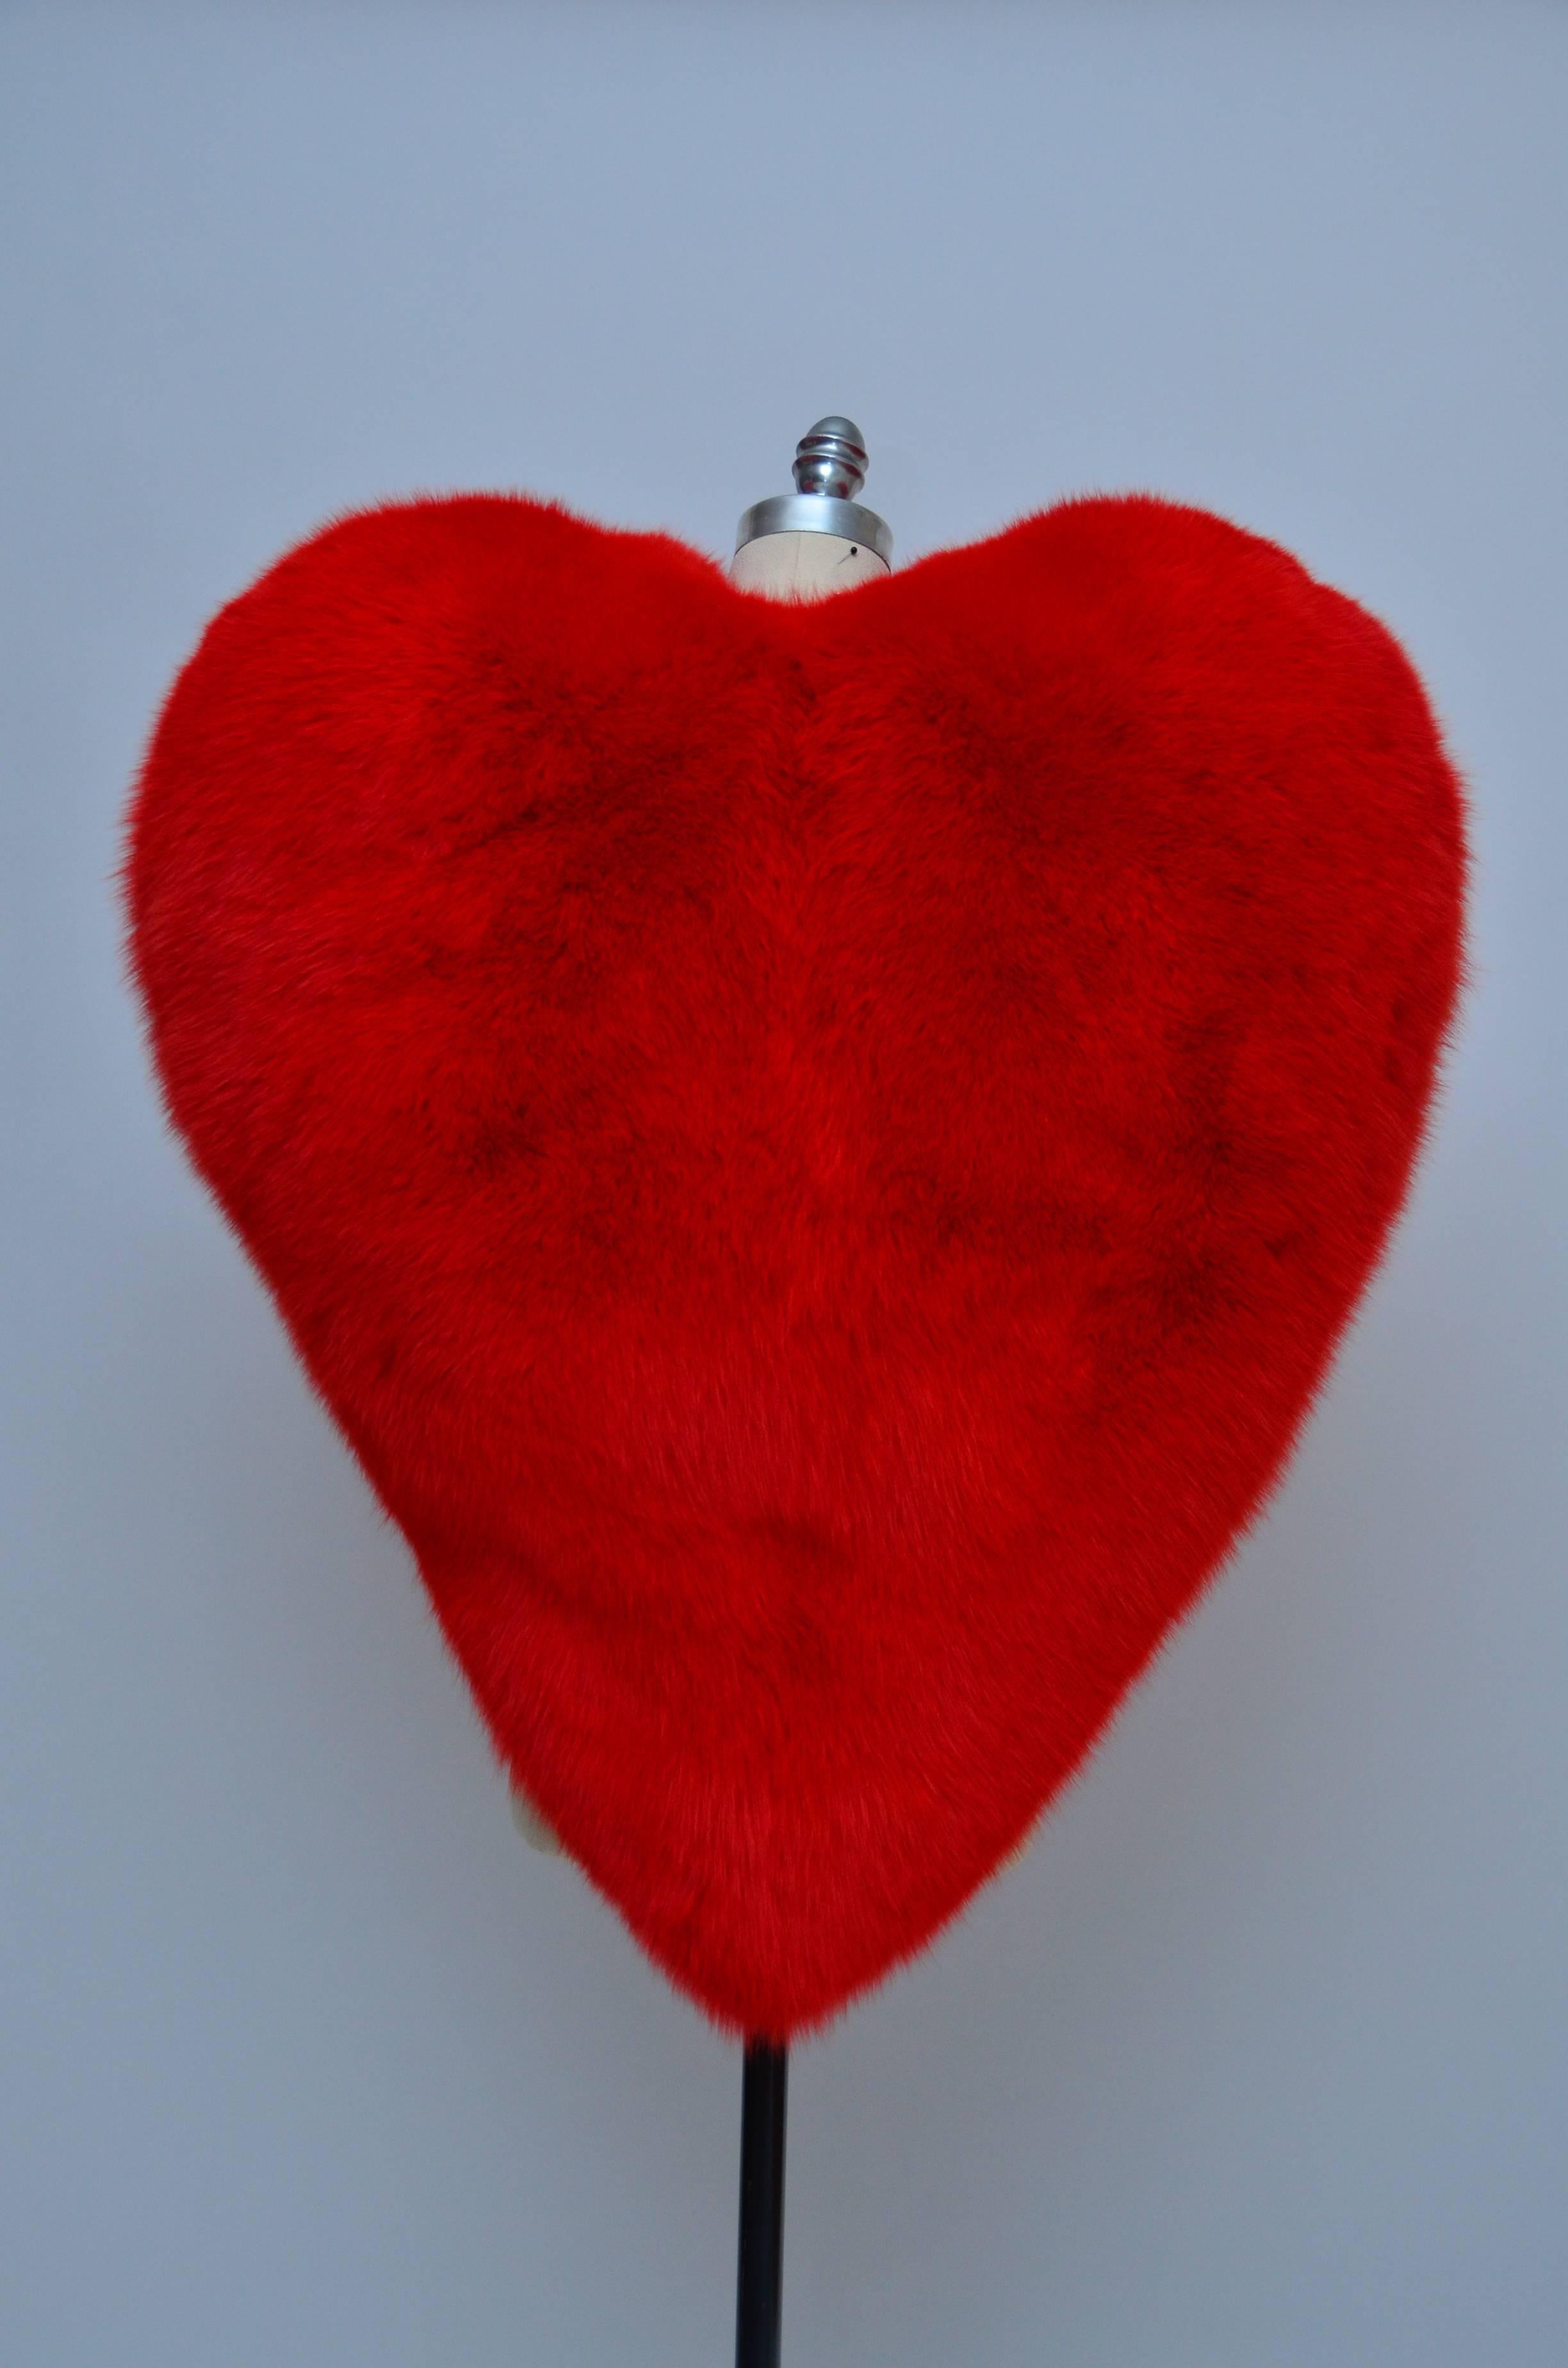 Famous Saint Laurent Heart fox cape.
Seen on the best dressed in fashion  and entertainment business as Anna Dello Russo and Rihanna......
Brand new with tags attached.
Size 38 FR.
Made in Italy.
Dyed fox fur from Finland.
Very easy to wear